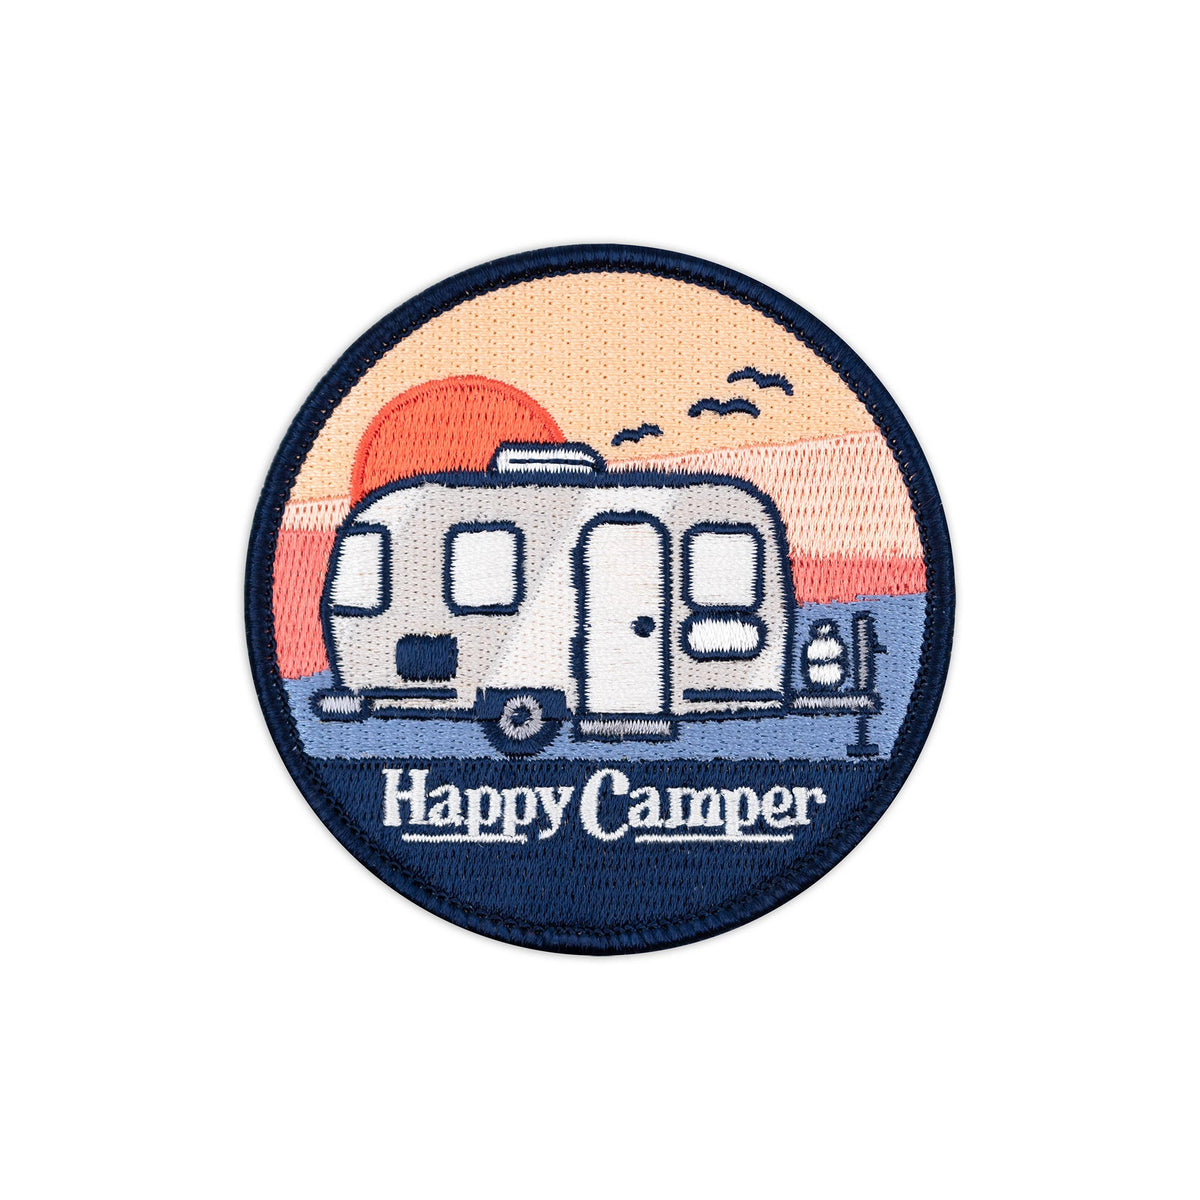 Happy Camper Travel Trailer embroidered iron-on patch